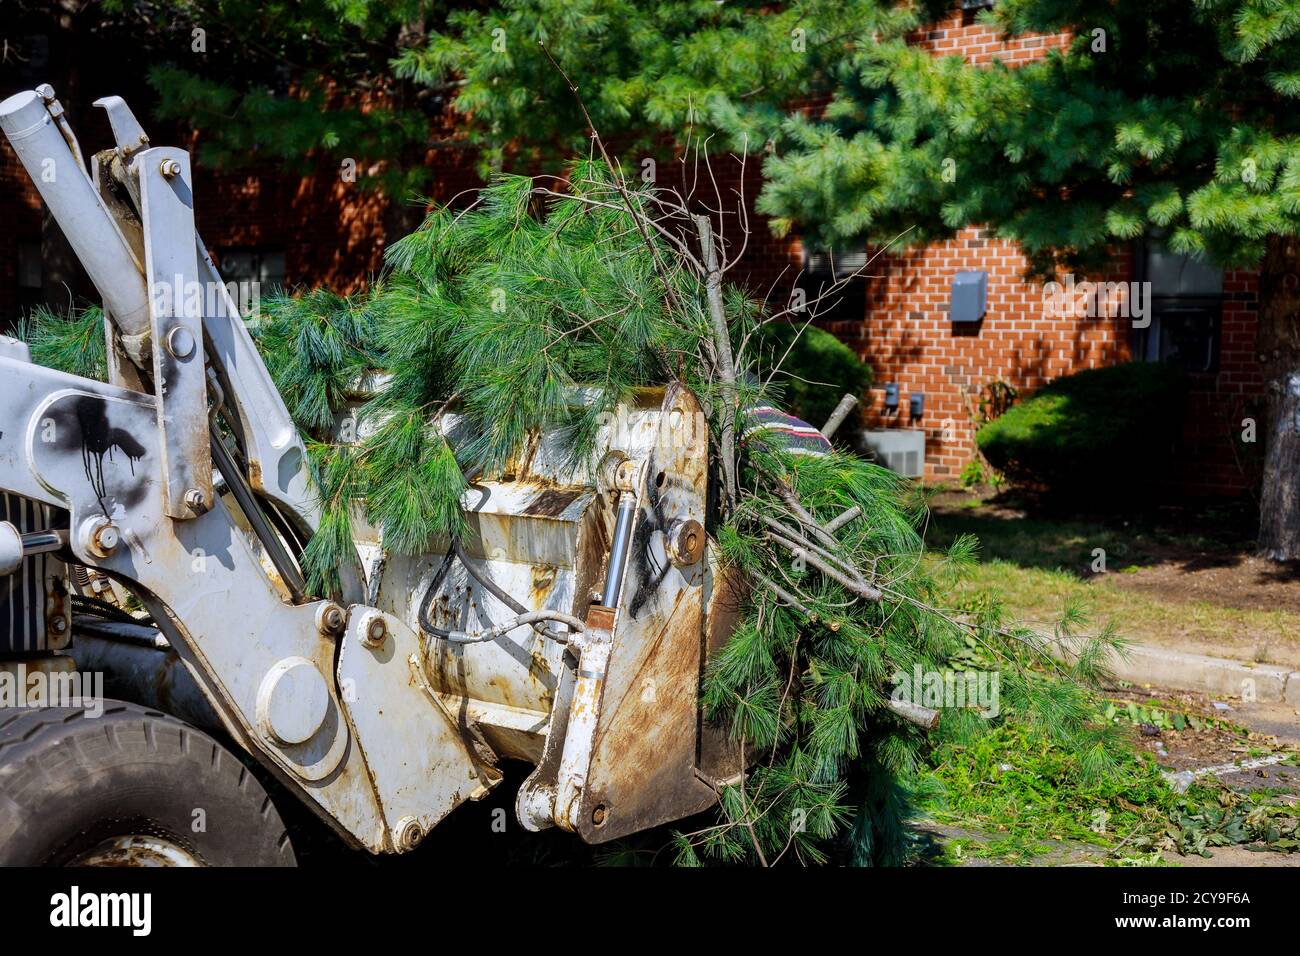 Pile of tree branches in the city street removal of branch removal in tractor bucket. Stock Photo